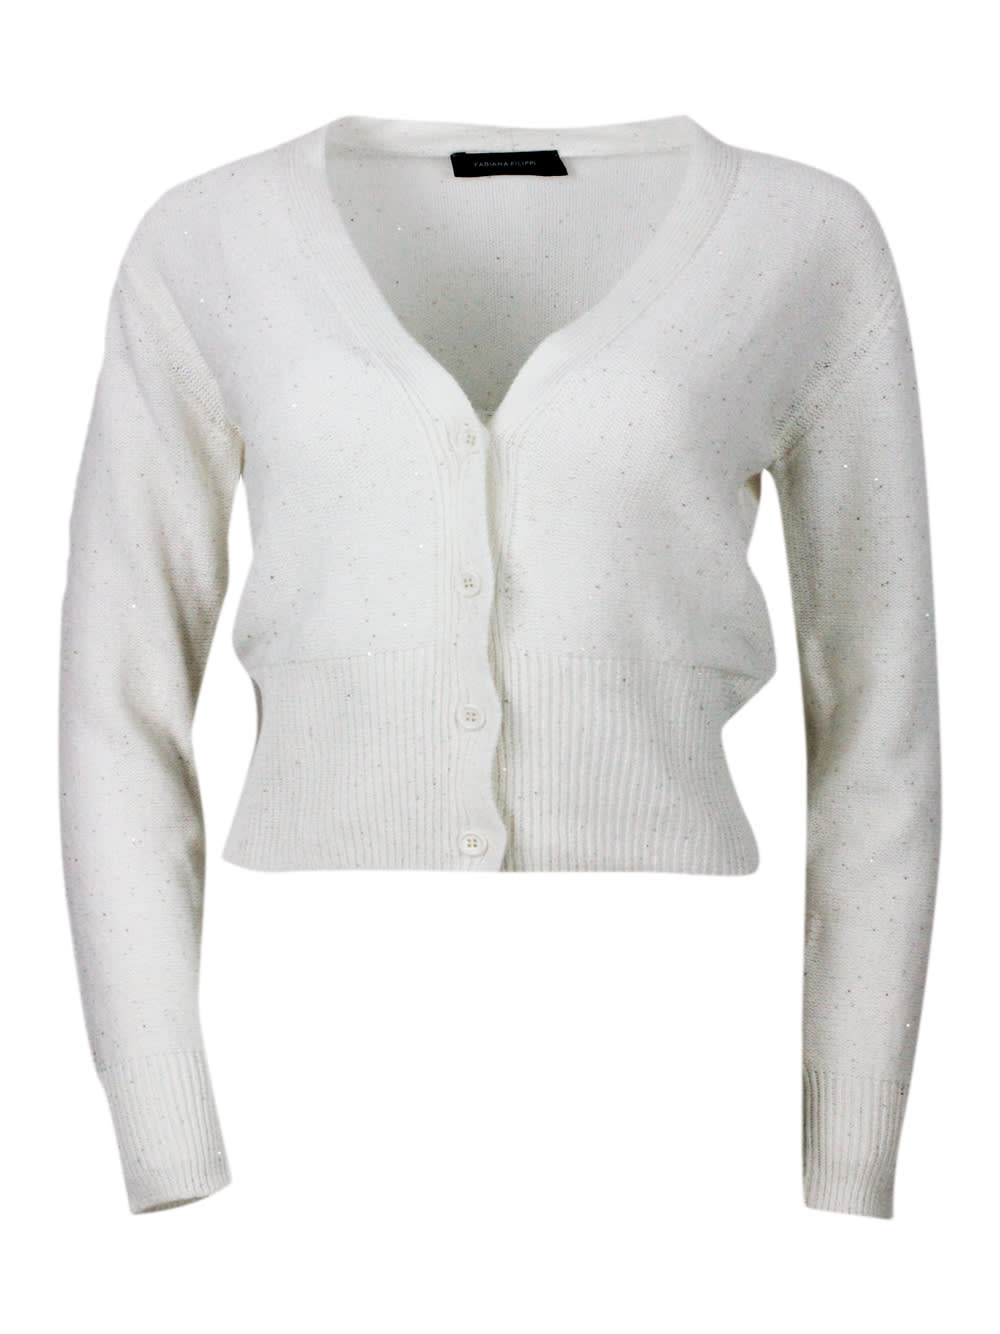 Shop Fabiana Filippi Cardigan Sweater With Button Closure Embellished With Brilliant Applied Microsequins In Cream